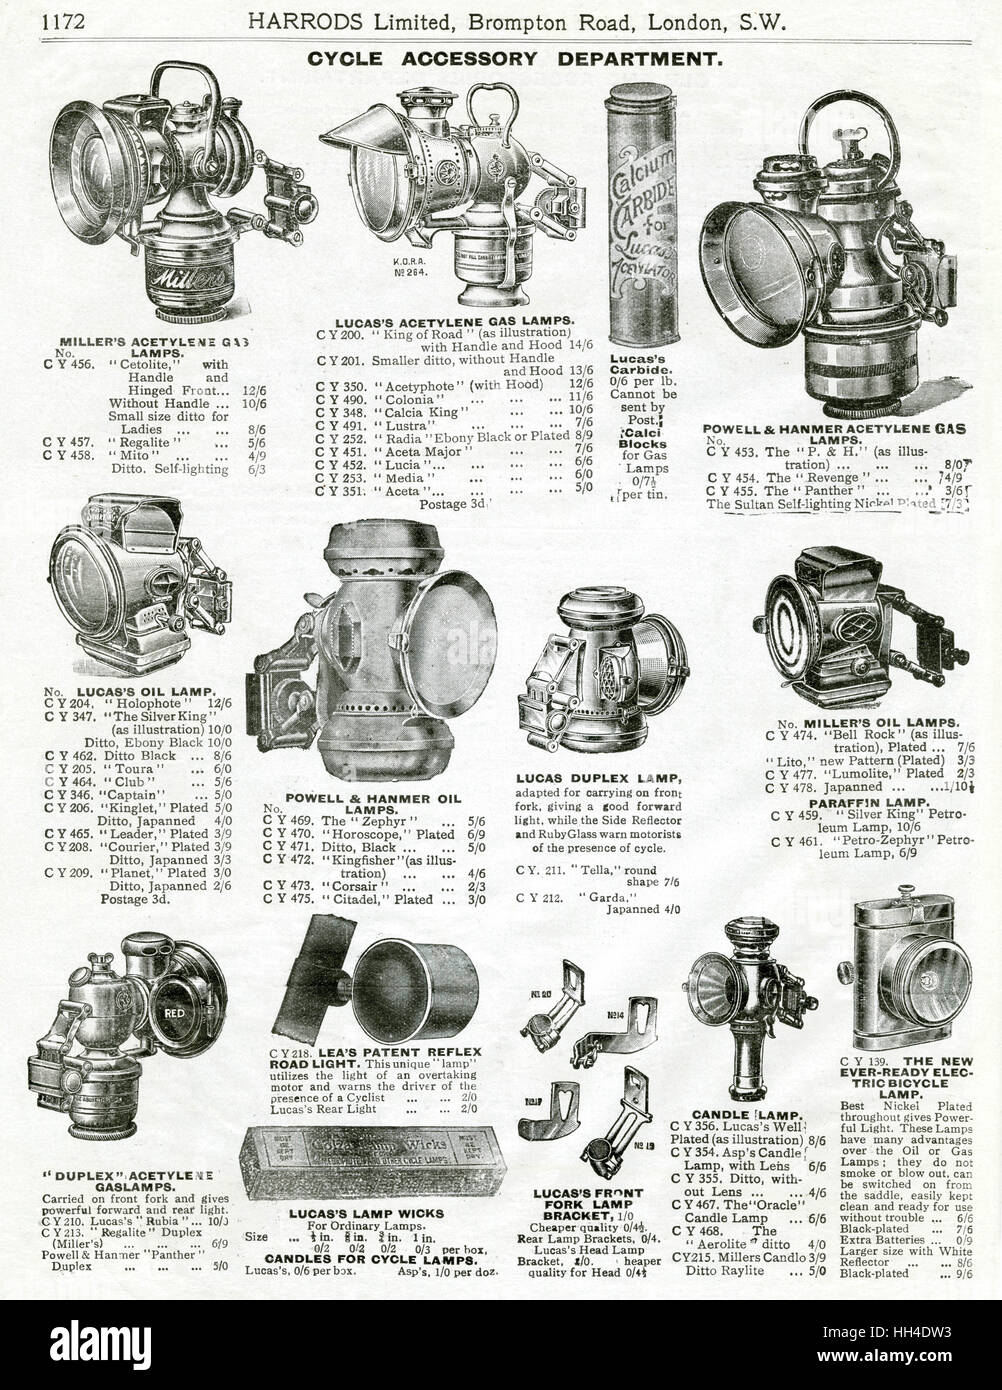 Trade catalogue for cycle accessories 1911 Stock Photo